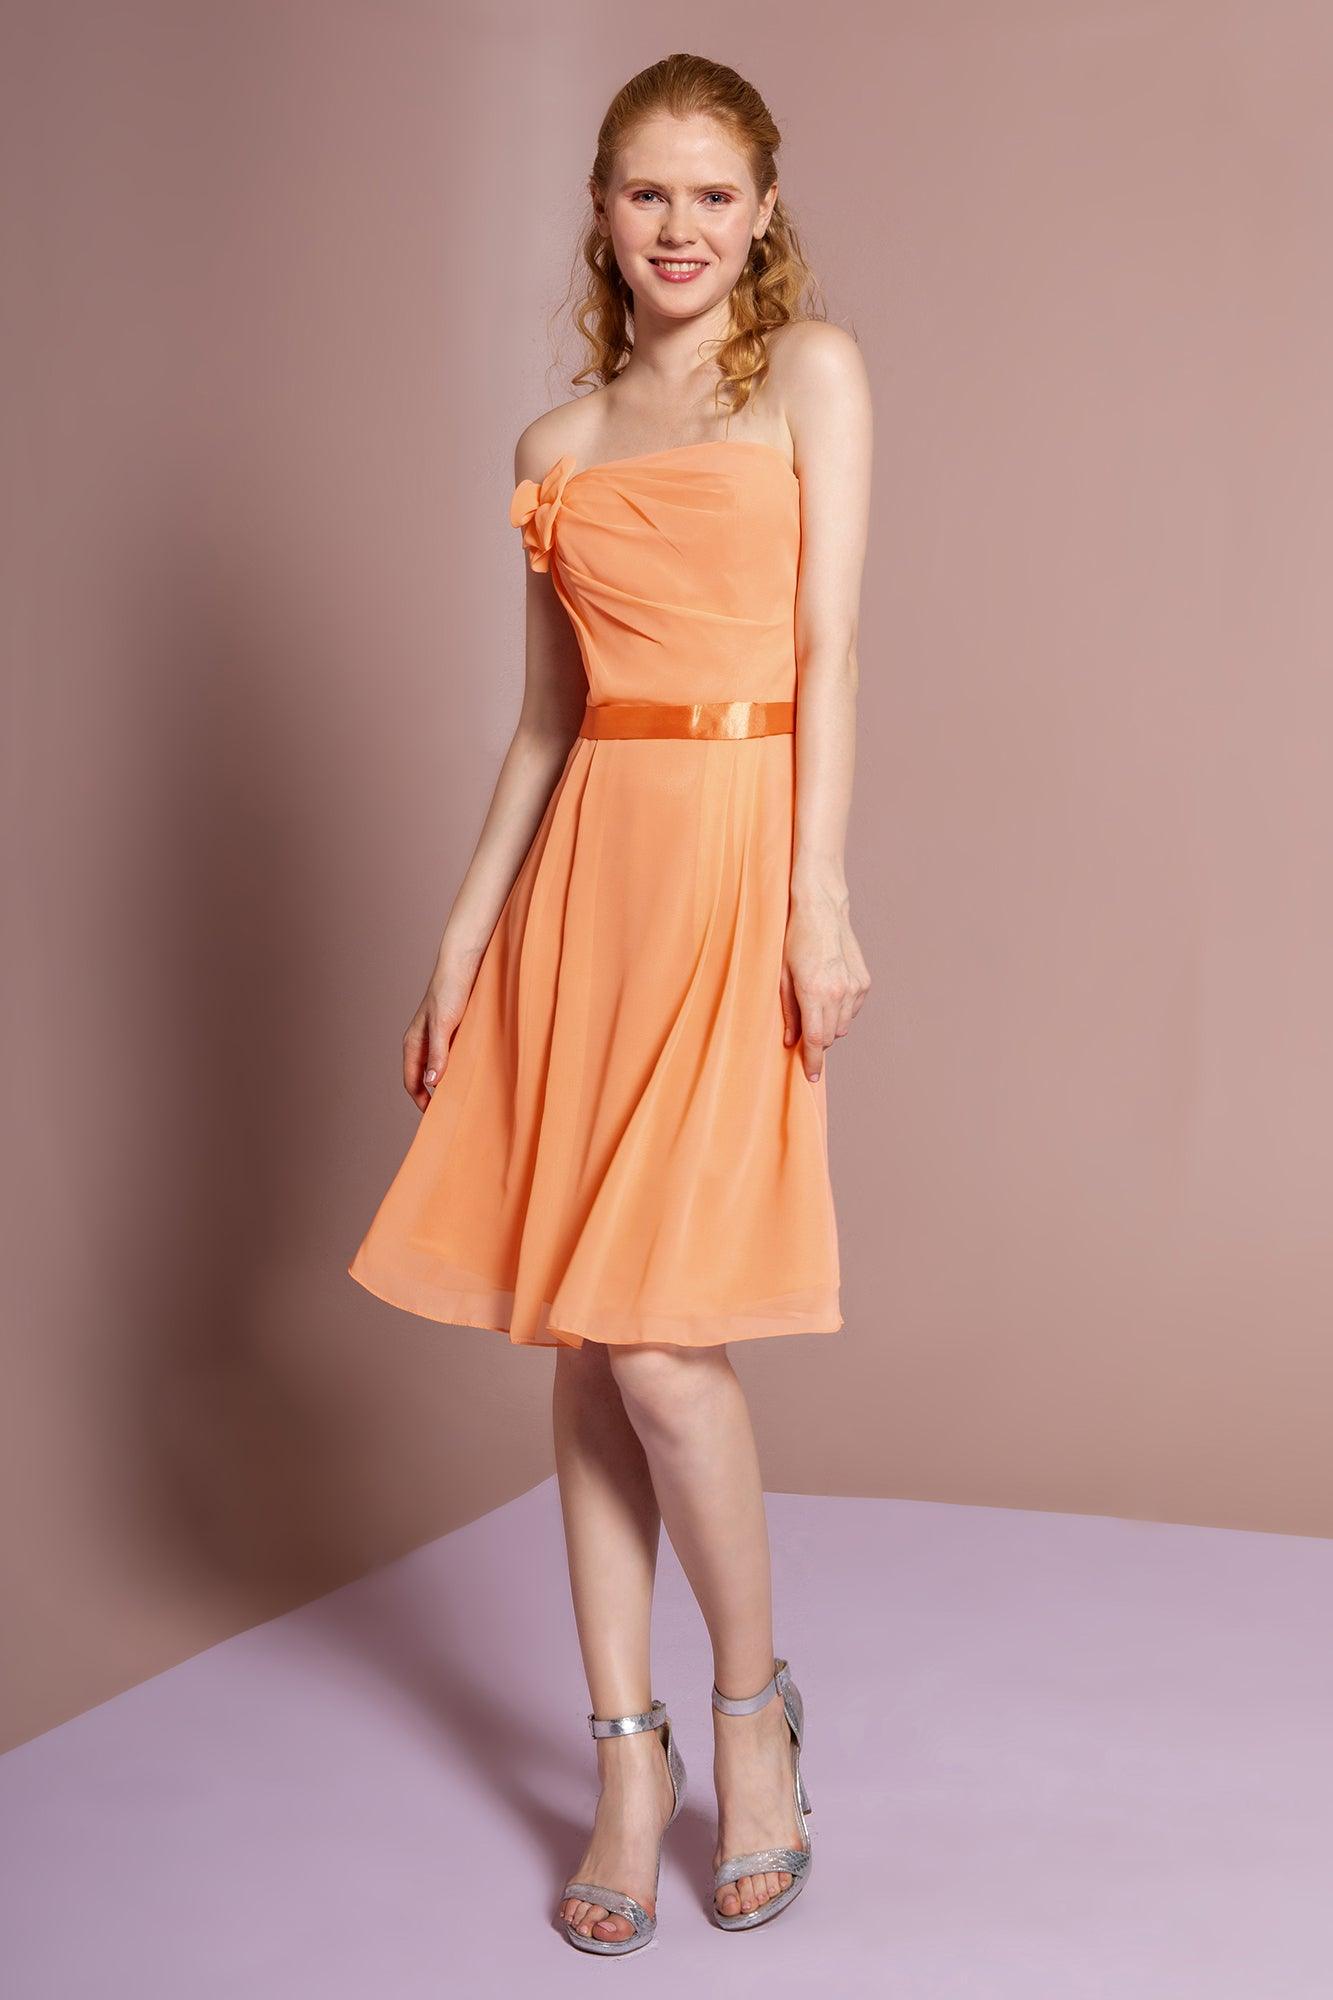 Strapless Chiffon Short Cocktail Dress - The Dress Outlet